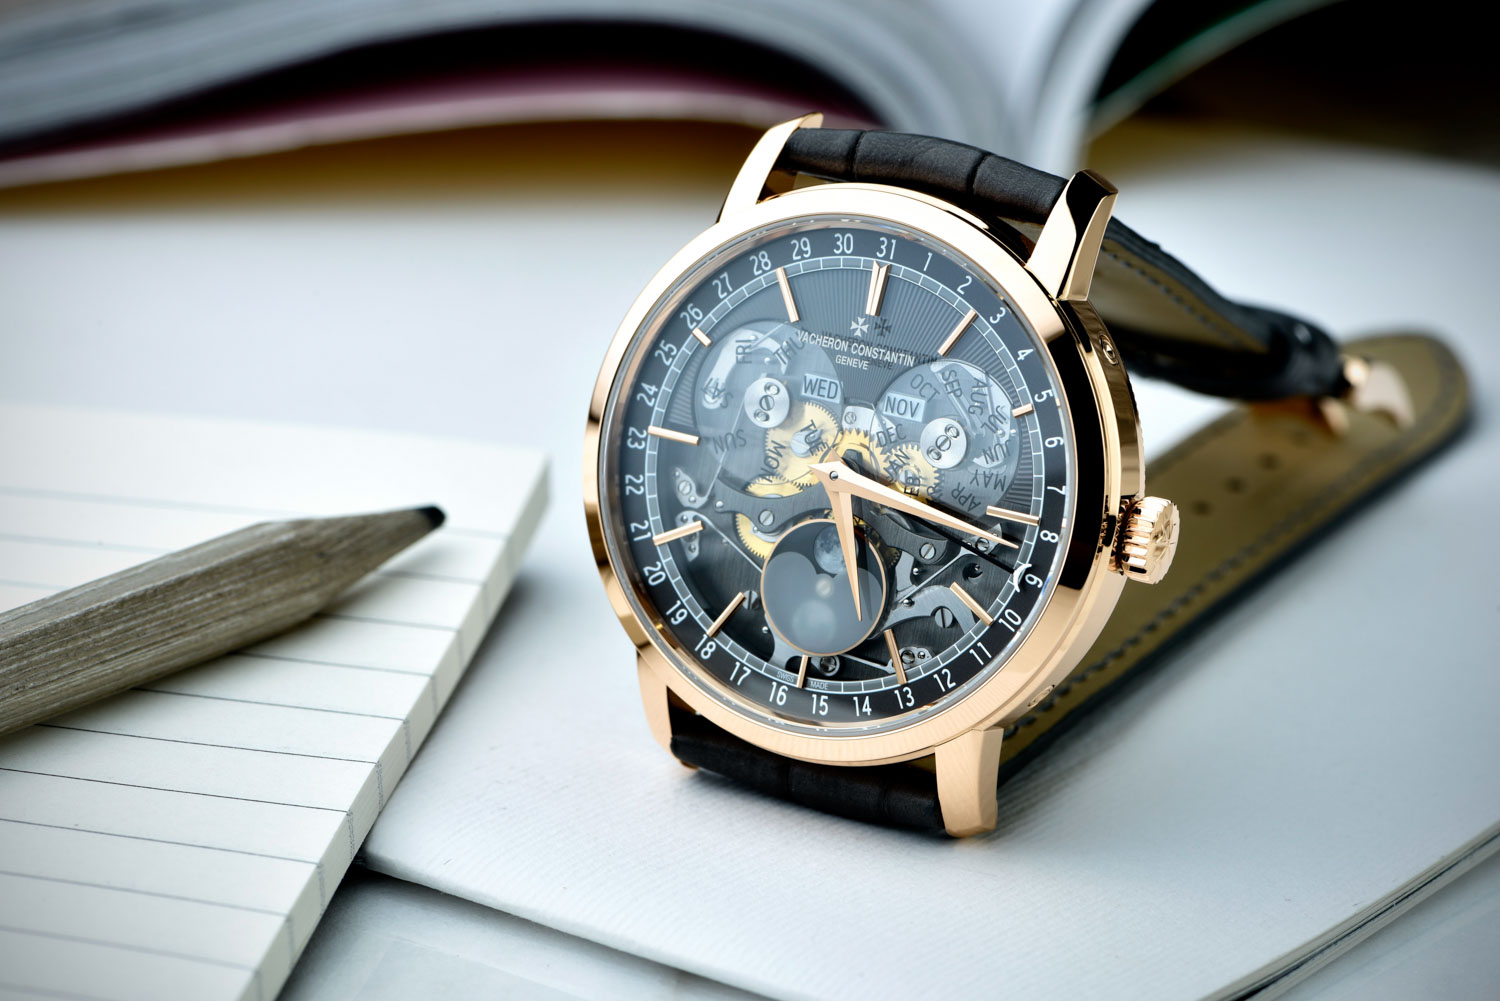 The Vacheron Constantin Traditionnelle Complete Calendar Openface in 18K 5N pink gold